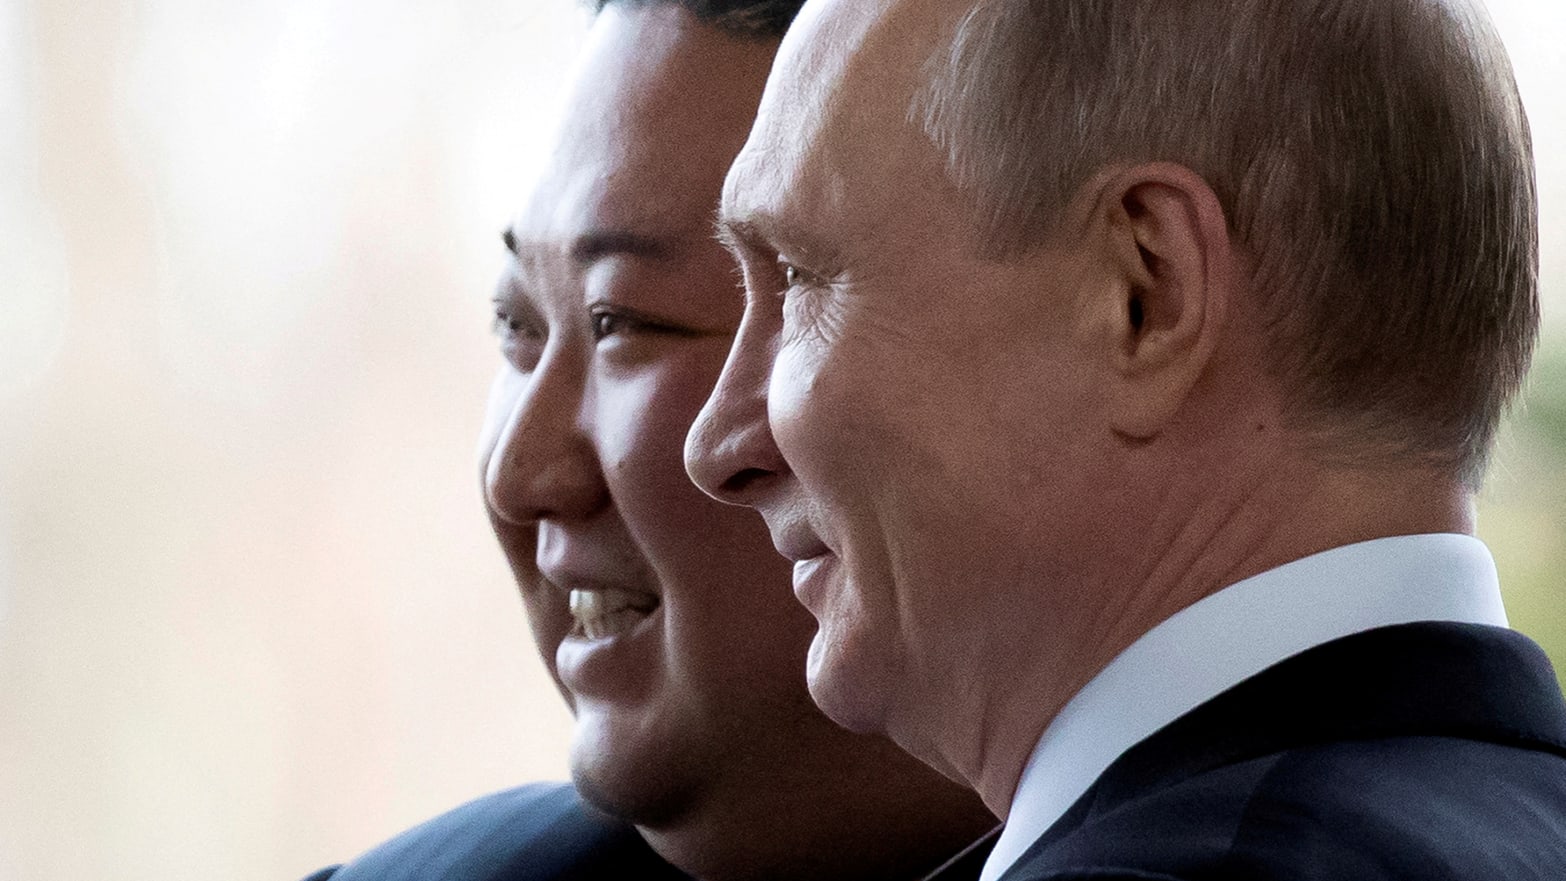 Russian President Vladimir Putin and North Korea's leader Kim Jong Un pose for a photo during their meeting in Vladivostok, Russia, April 25, 2019.